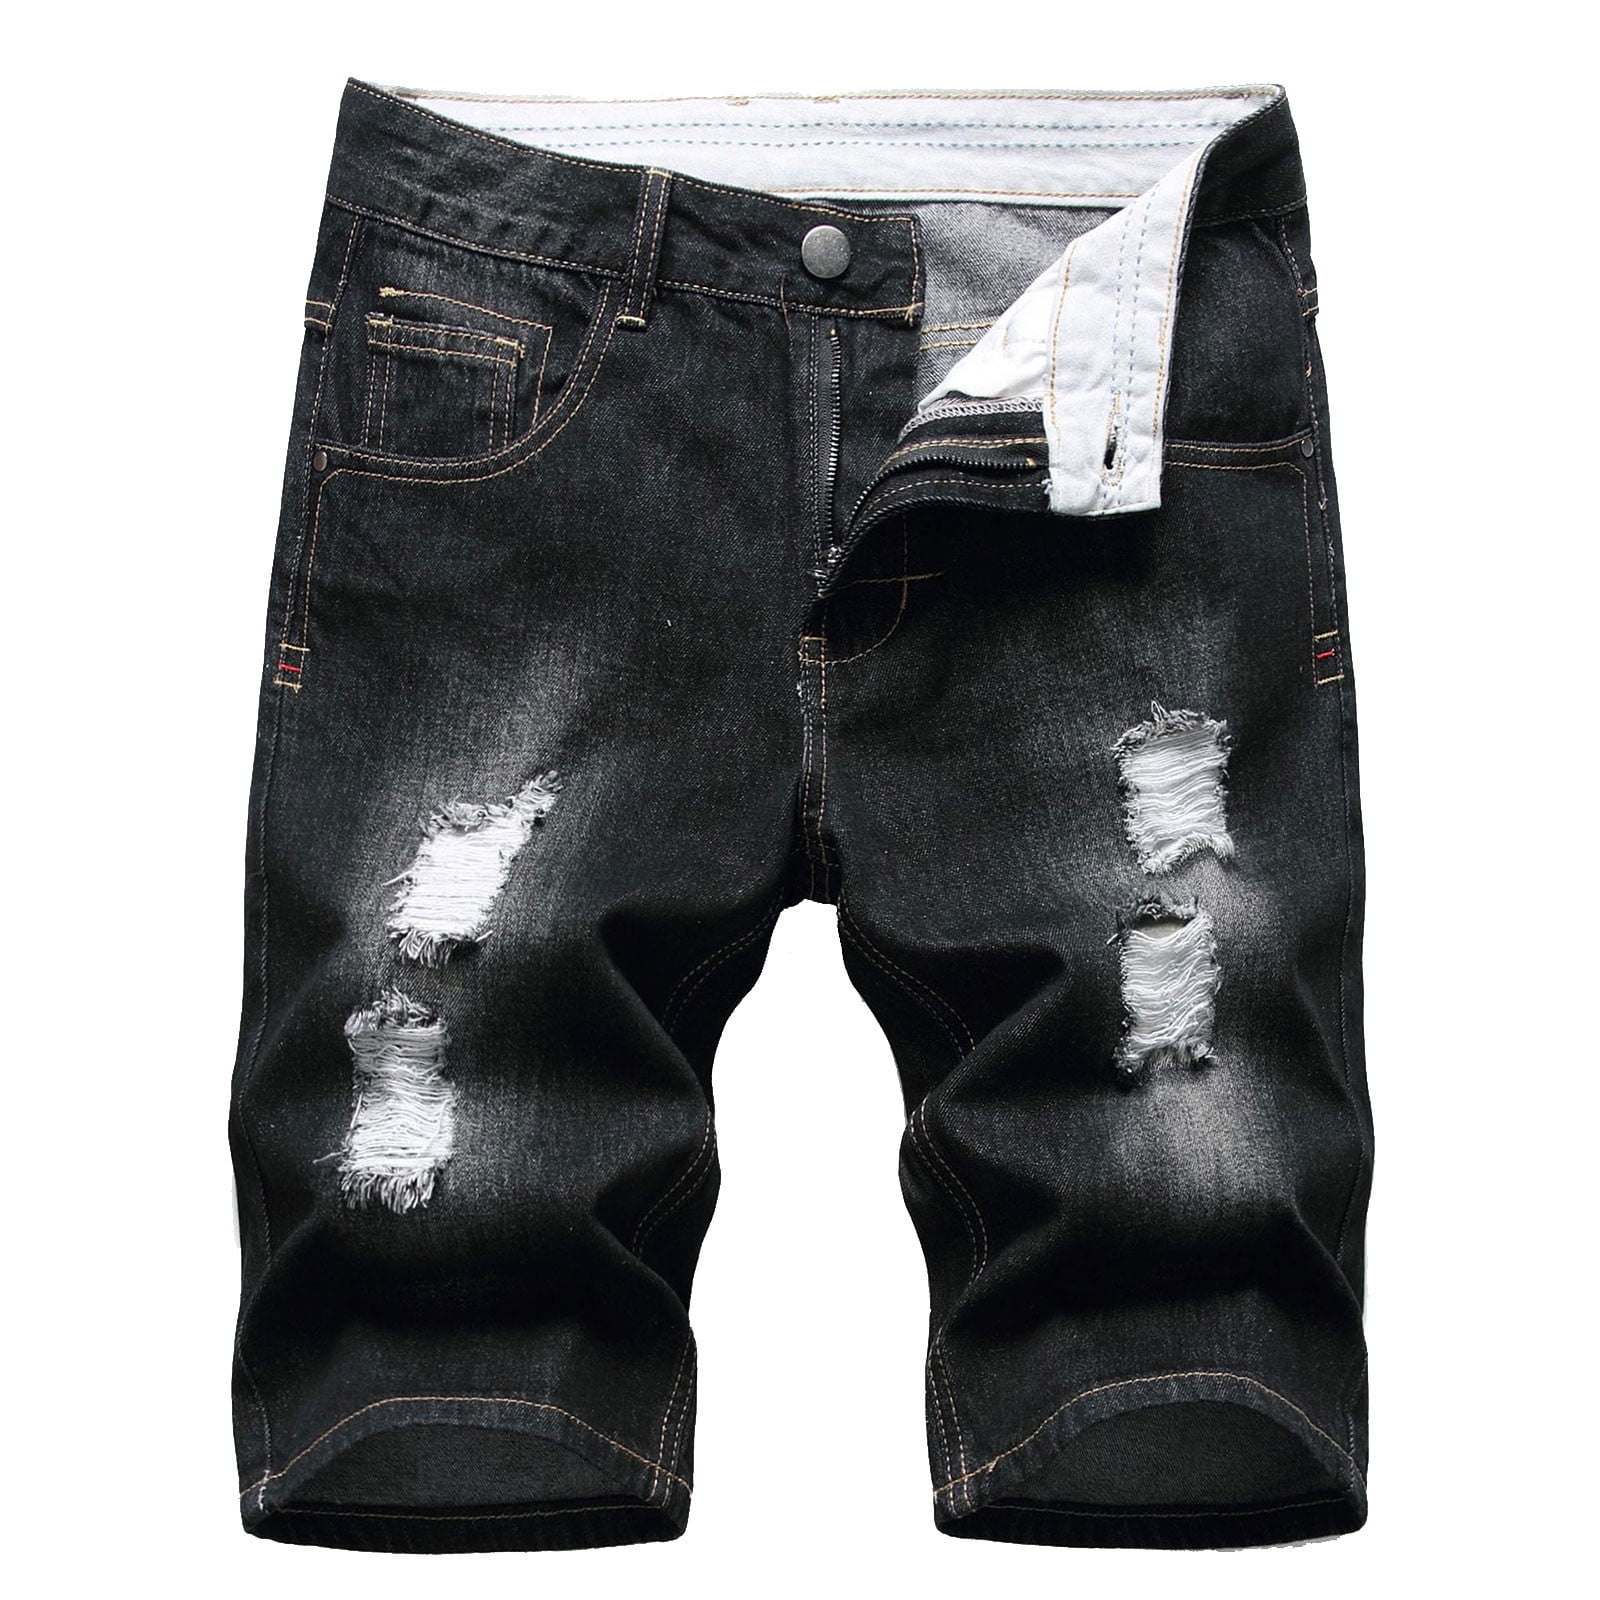 YYDGH Denim Shorts for Men Summer Vintage Washed Ripped Distressed Straight  Fit Knee Length Casual Jean Shorts Black XL